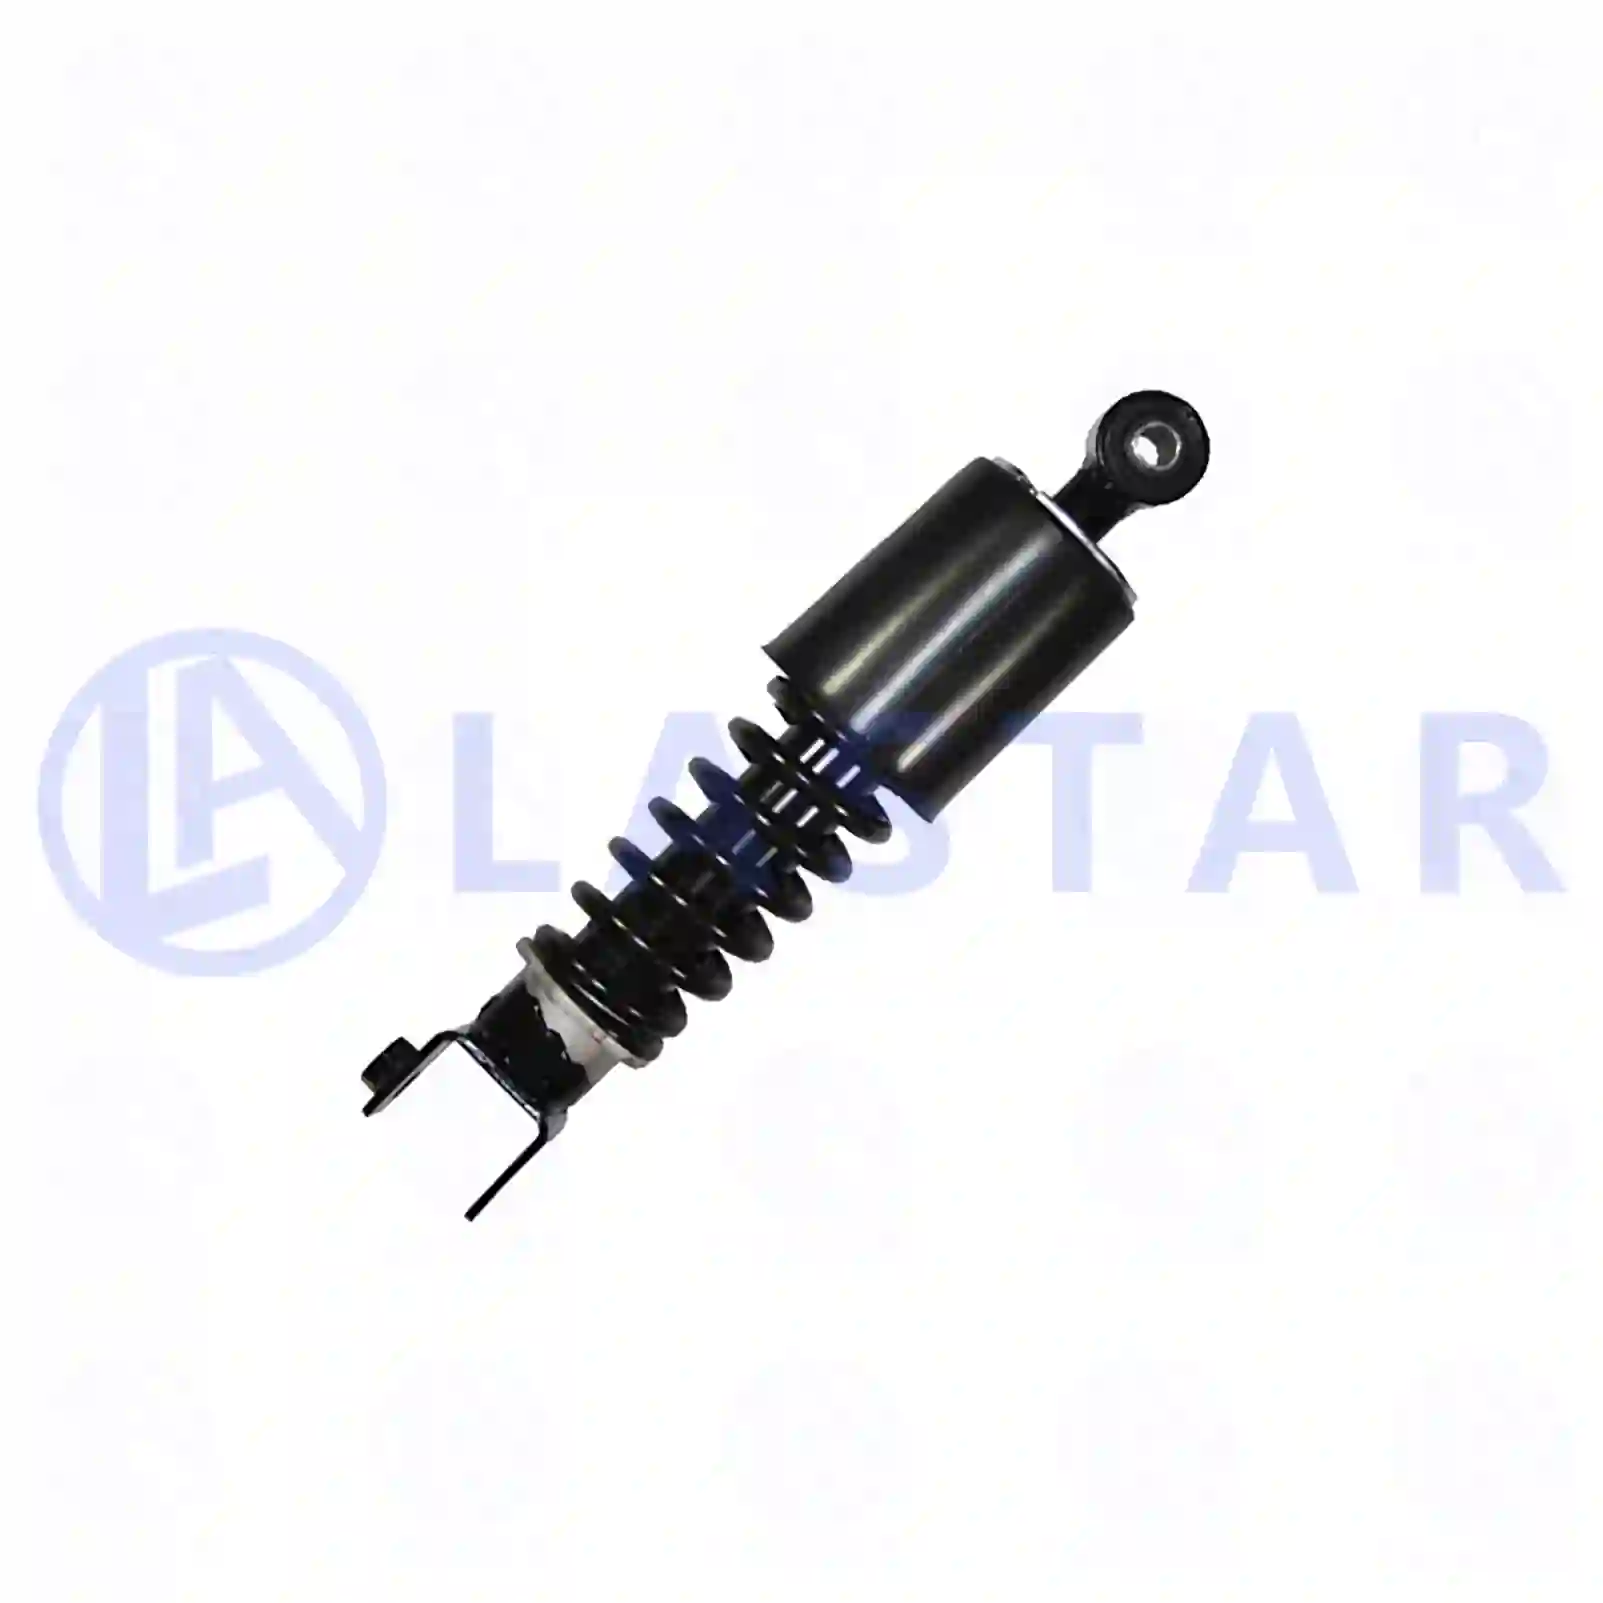 Cabin shock absorber, 77736053, 1802569, 1923646, 2023670 ||  77736053 Lastar Spare Part | Truck Spare Parts, Auotomotive Spare Parts Cabin shock absorber, 77736053, 1802569, 1923646, 2023670 ||  77736053 Lastar Spare Part | Truck Spare Parts, Auotomotive Spare Parts